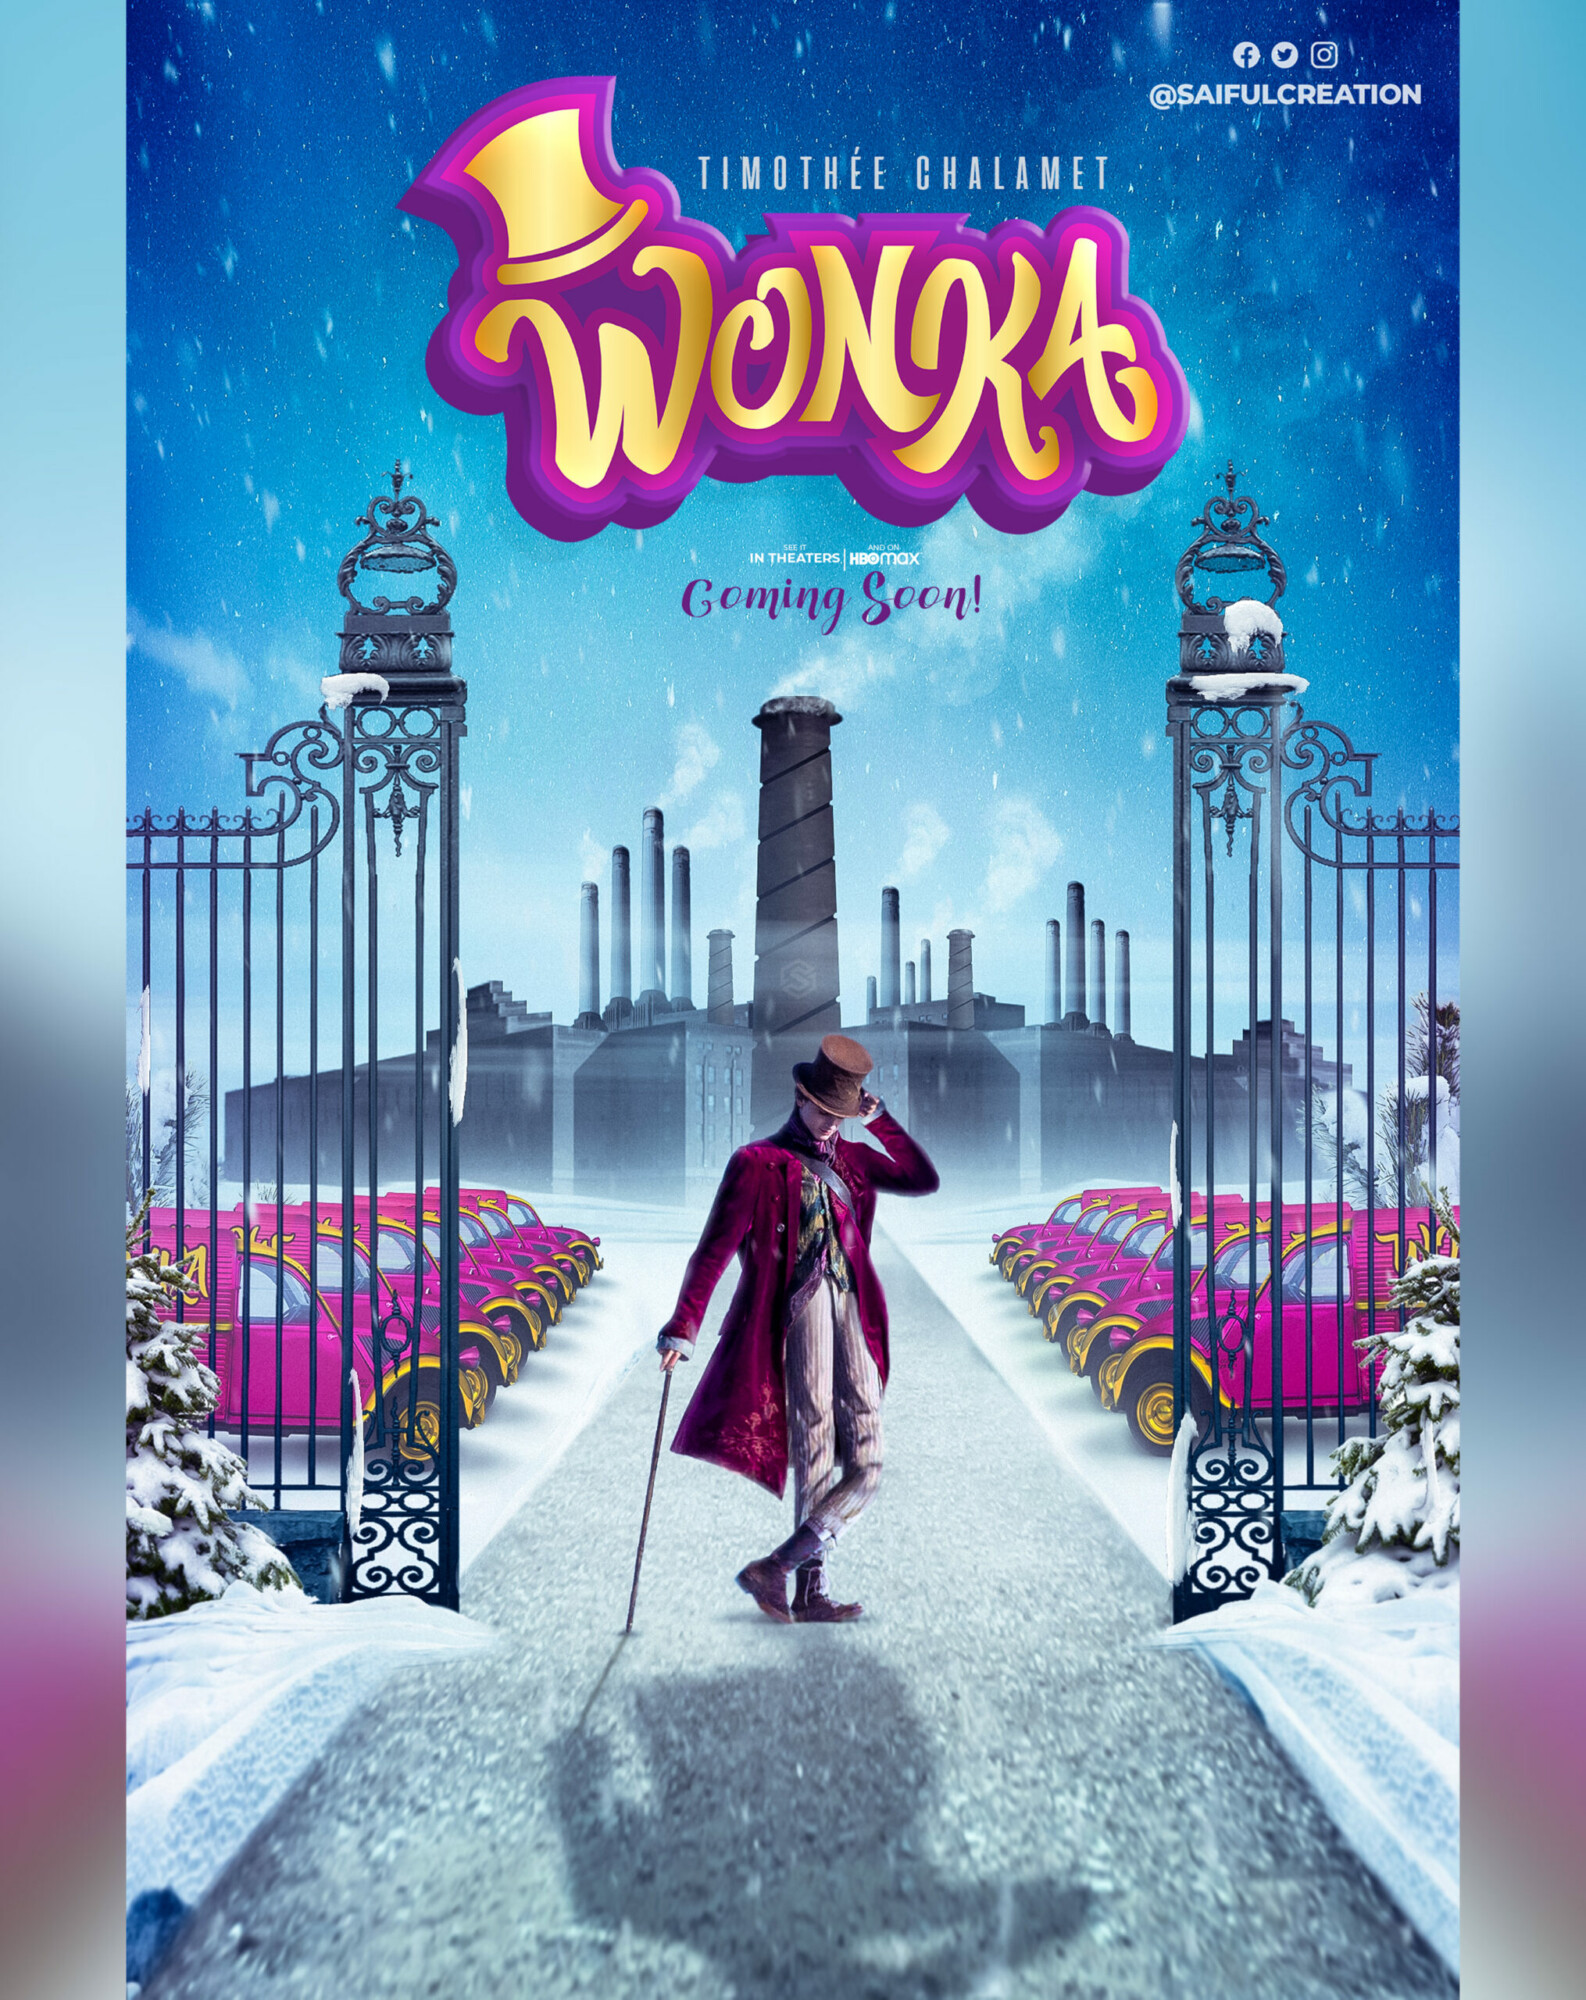 Wonka Movie Poster Design Poster By Saifulcreation